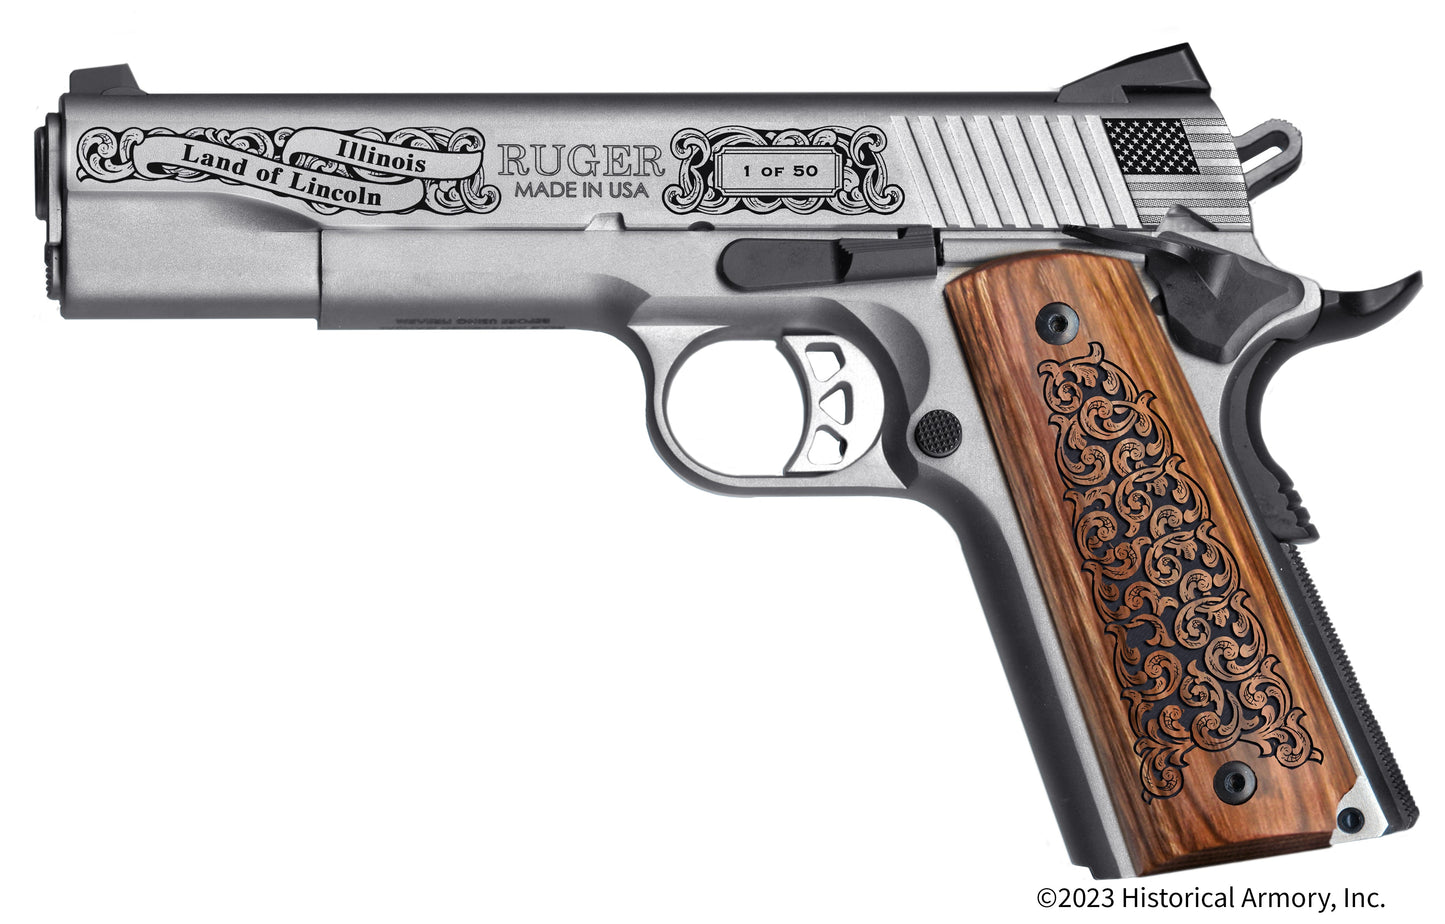 Mercer County Illinois Engraved .45 Auto Ruger 1911